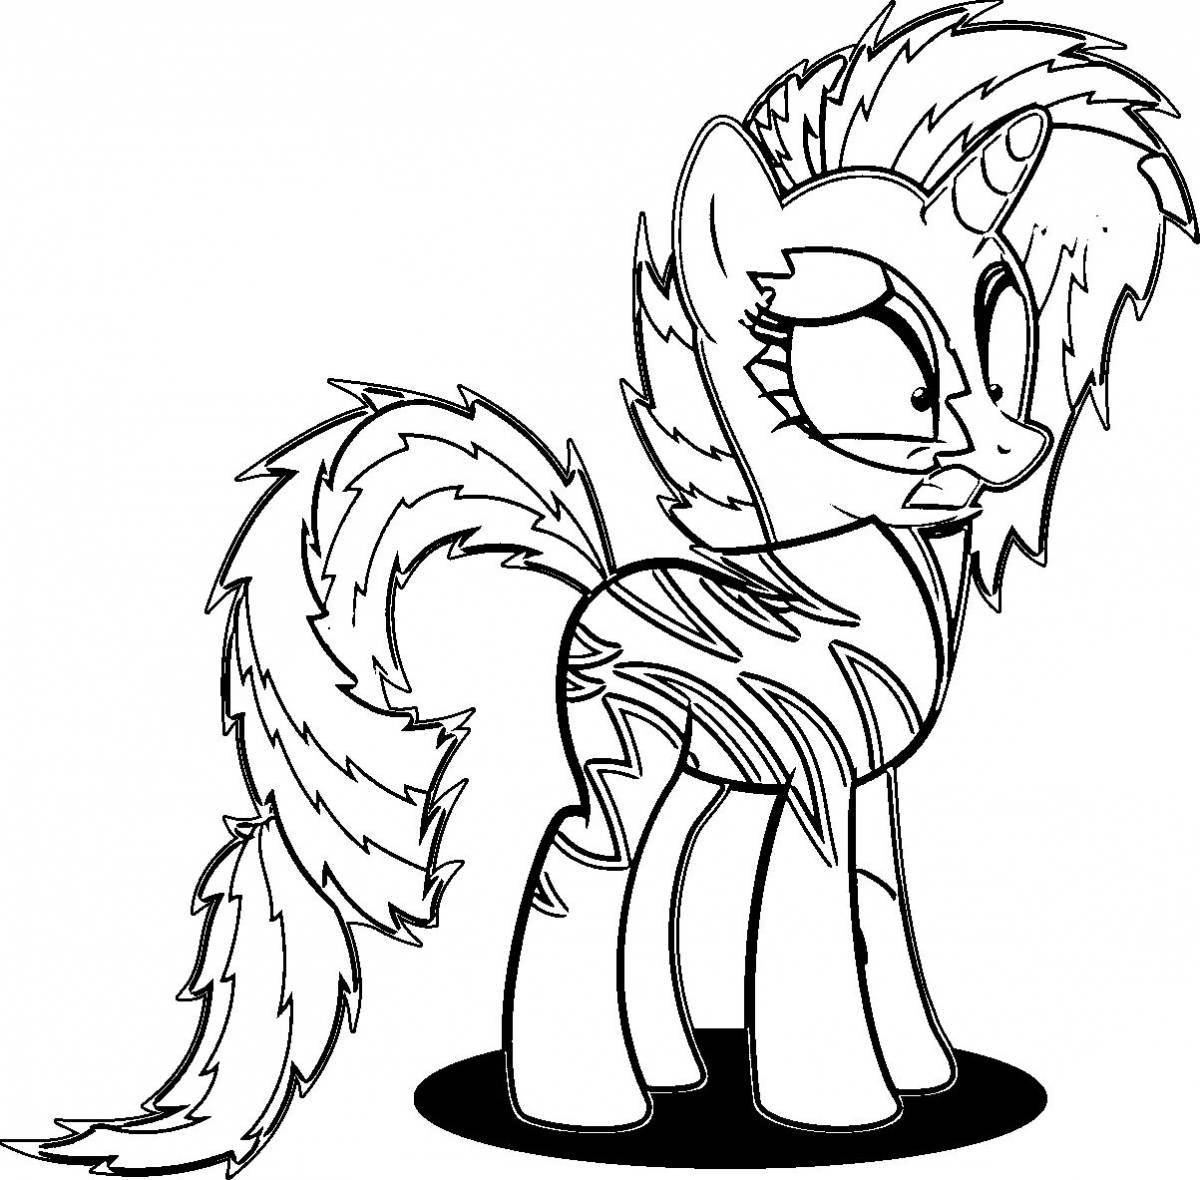 Dazzling storm pony coloring page